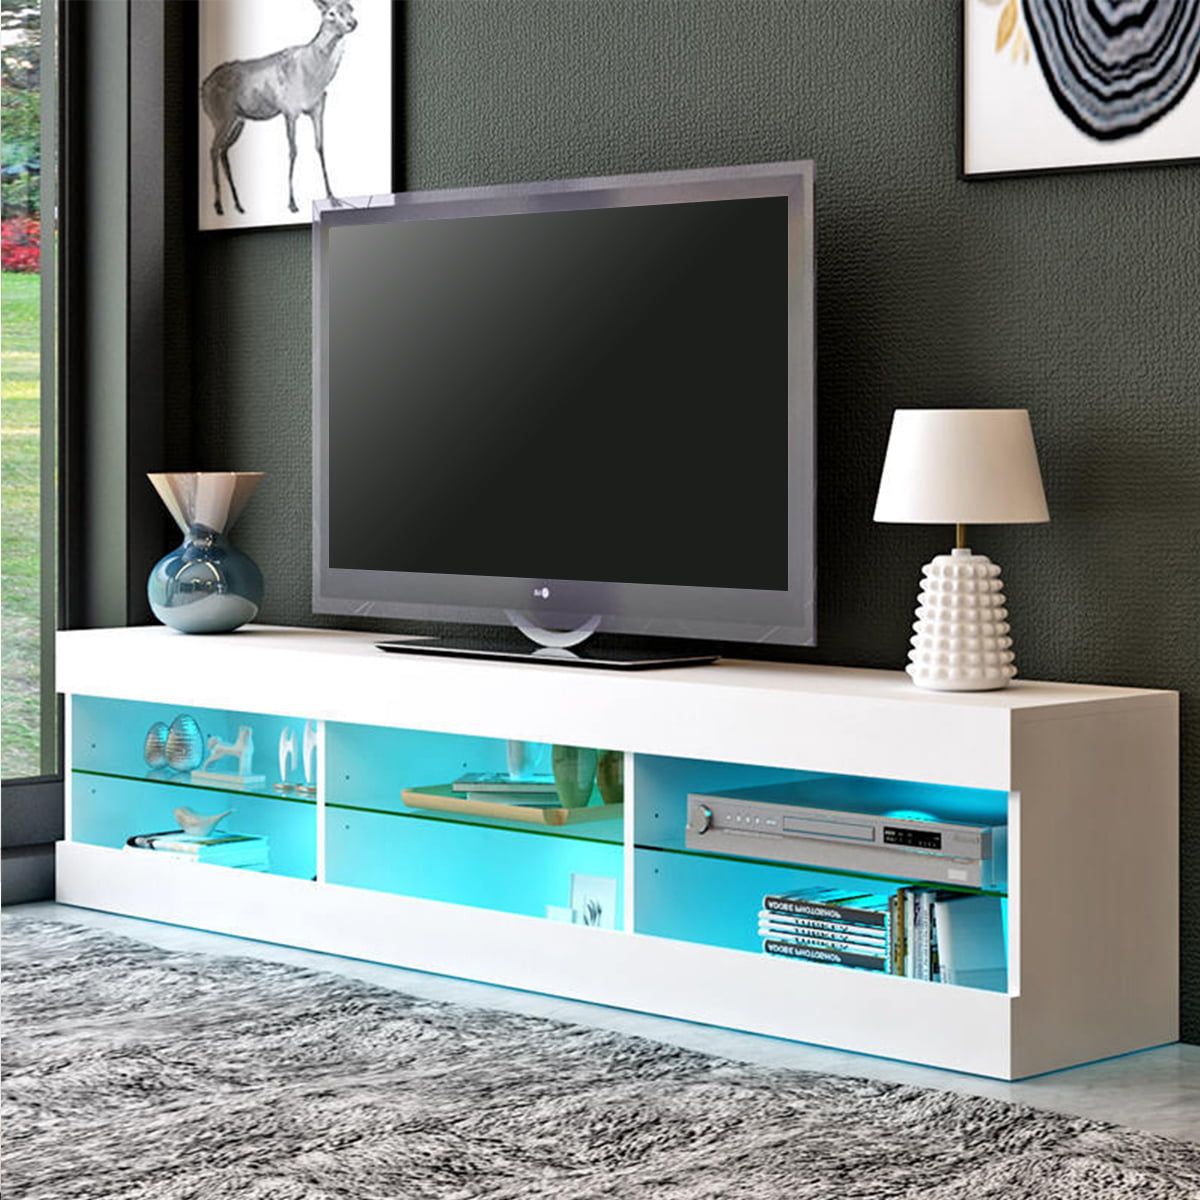 57'' Tv Stand With Rgb Led Lights, Modern Decorative Tv Console Storage Throughout Rgb Tv Entertainment Centers (Gallery 4 of 20)